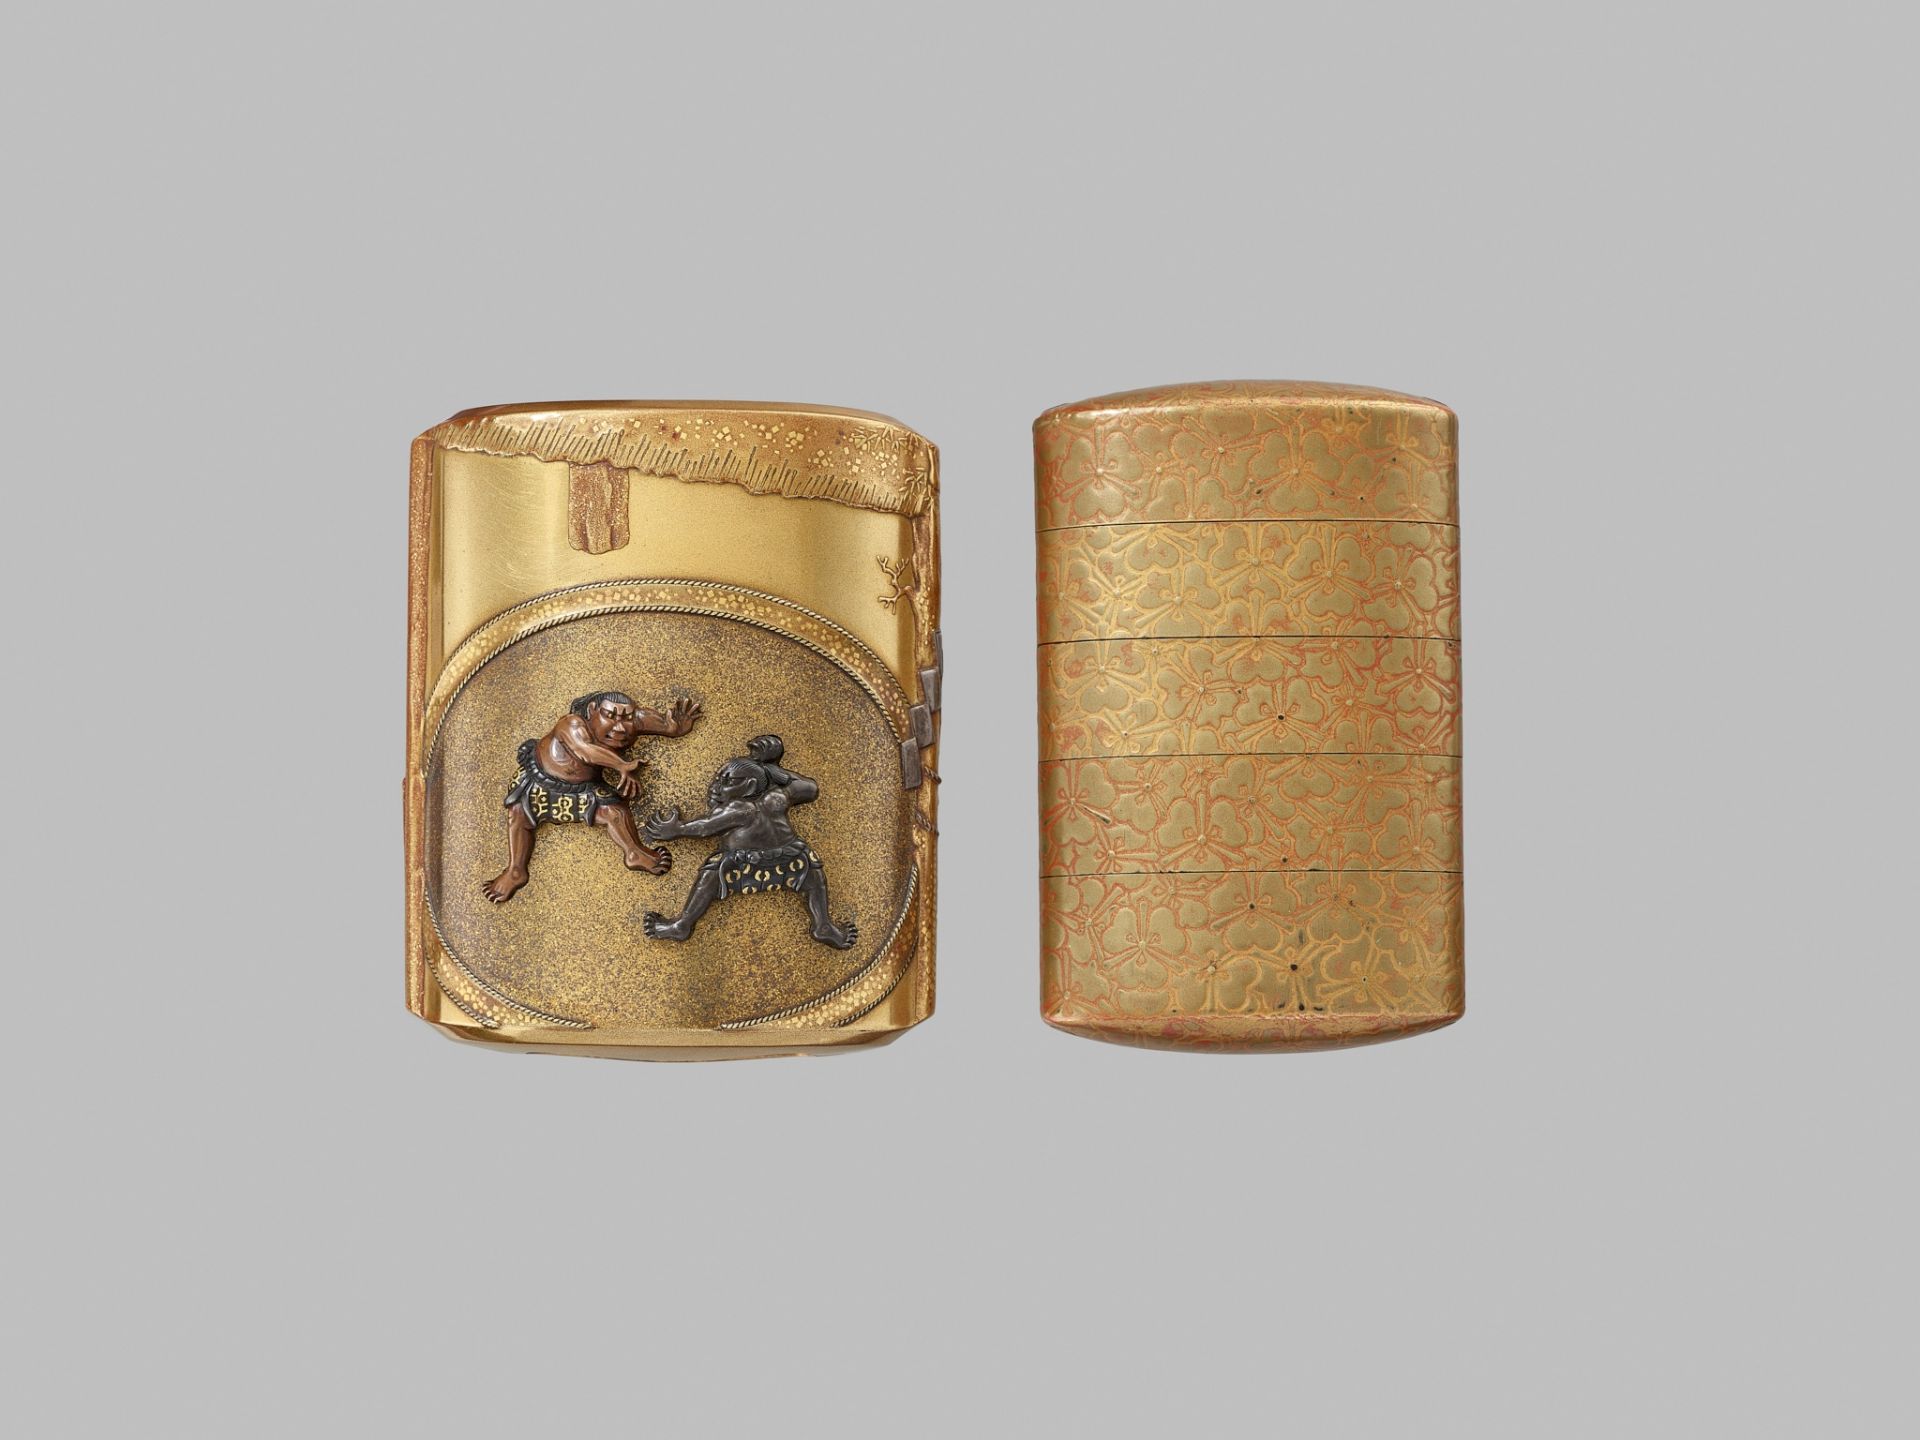 A RARE METAL-INLAID GOLD-LACQUER FOUR CASE SAYA (SHEATH) INRO DEPICTING SUMO WRESTLERS - Image 5 of 7